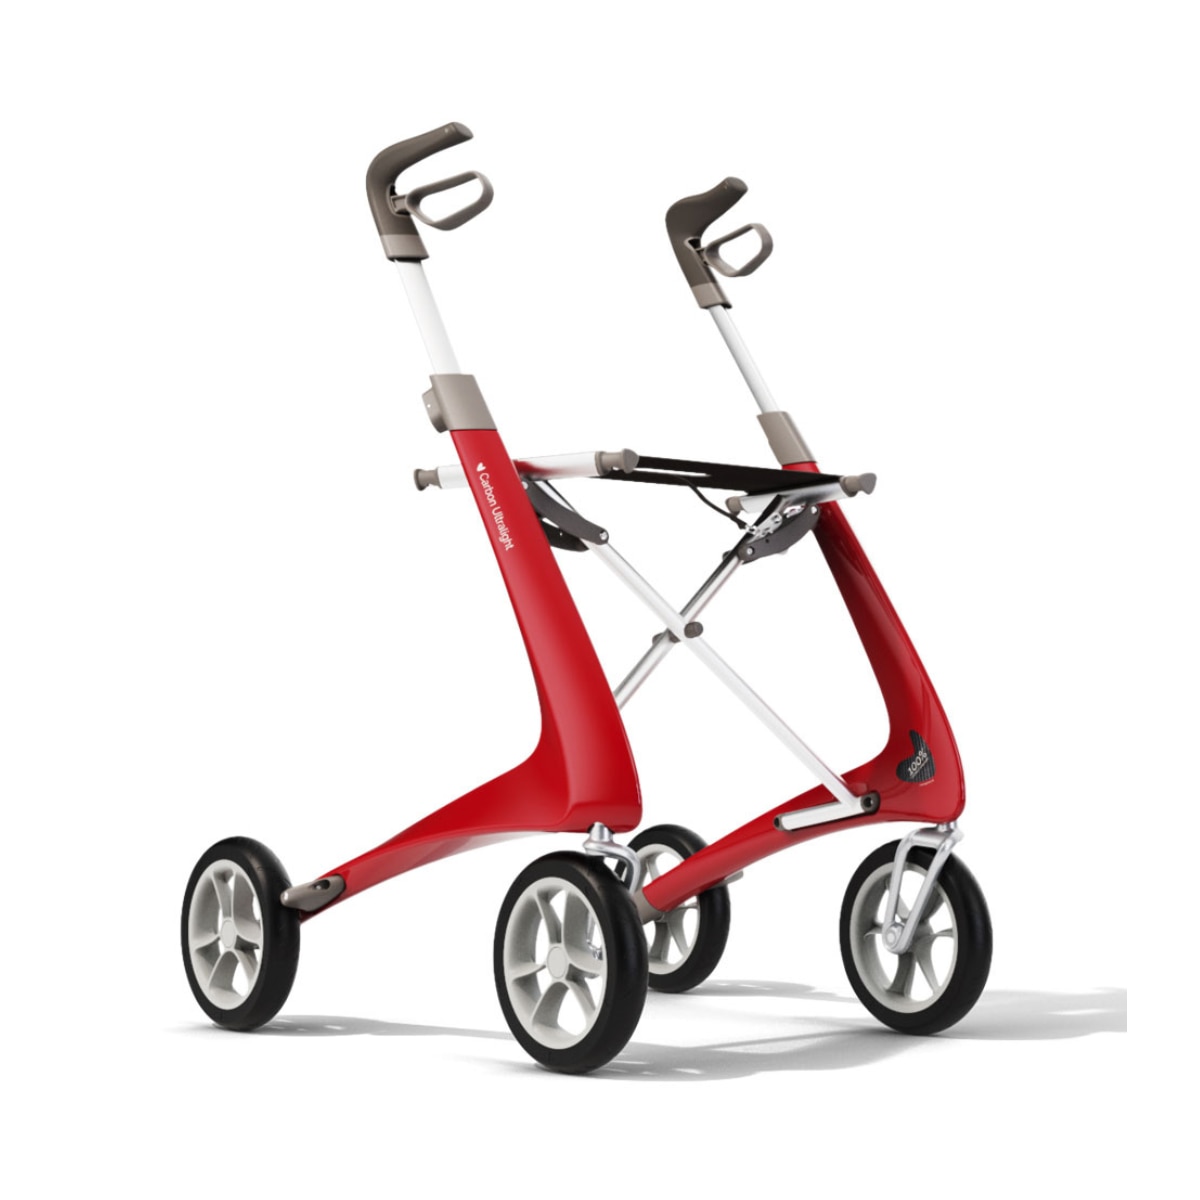 byACRE carbon fiber rollator with sleek, modern design and red accents